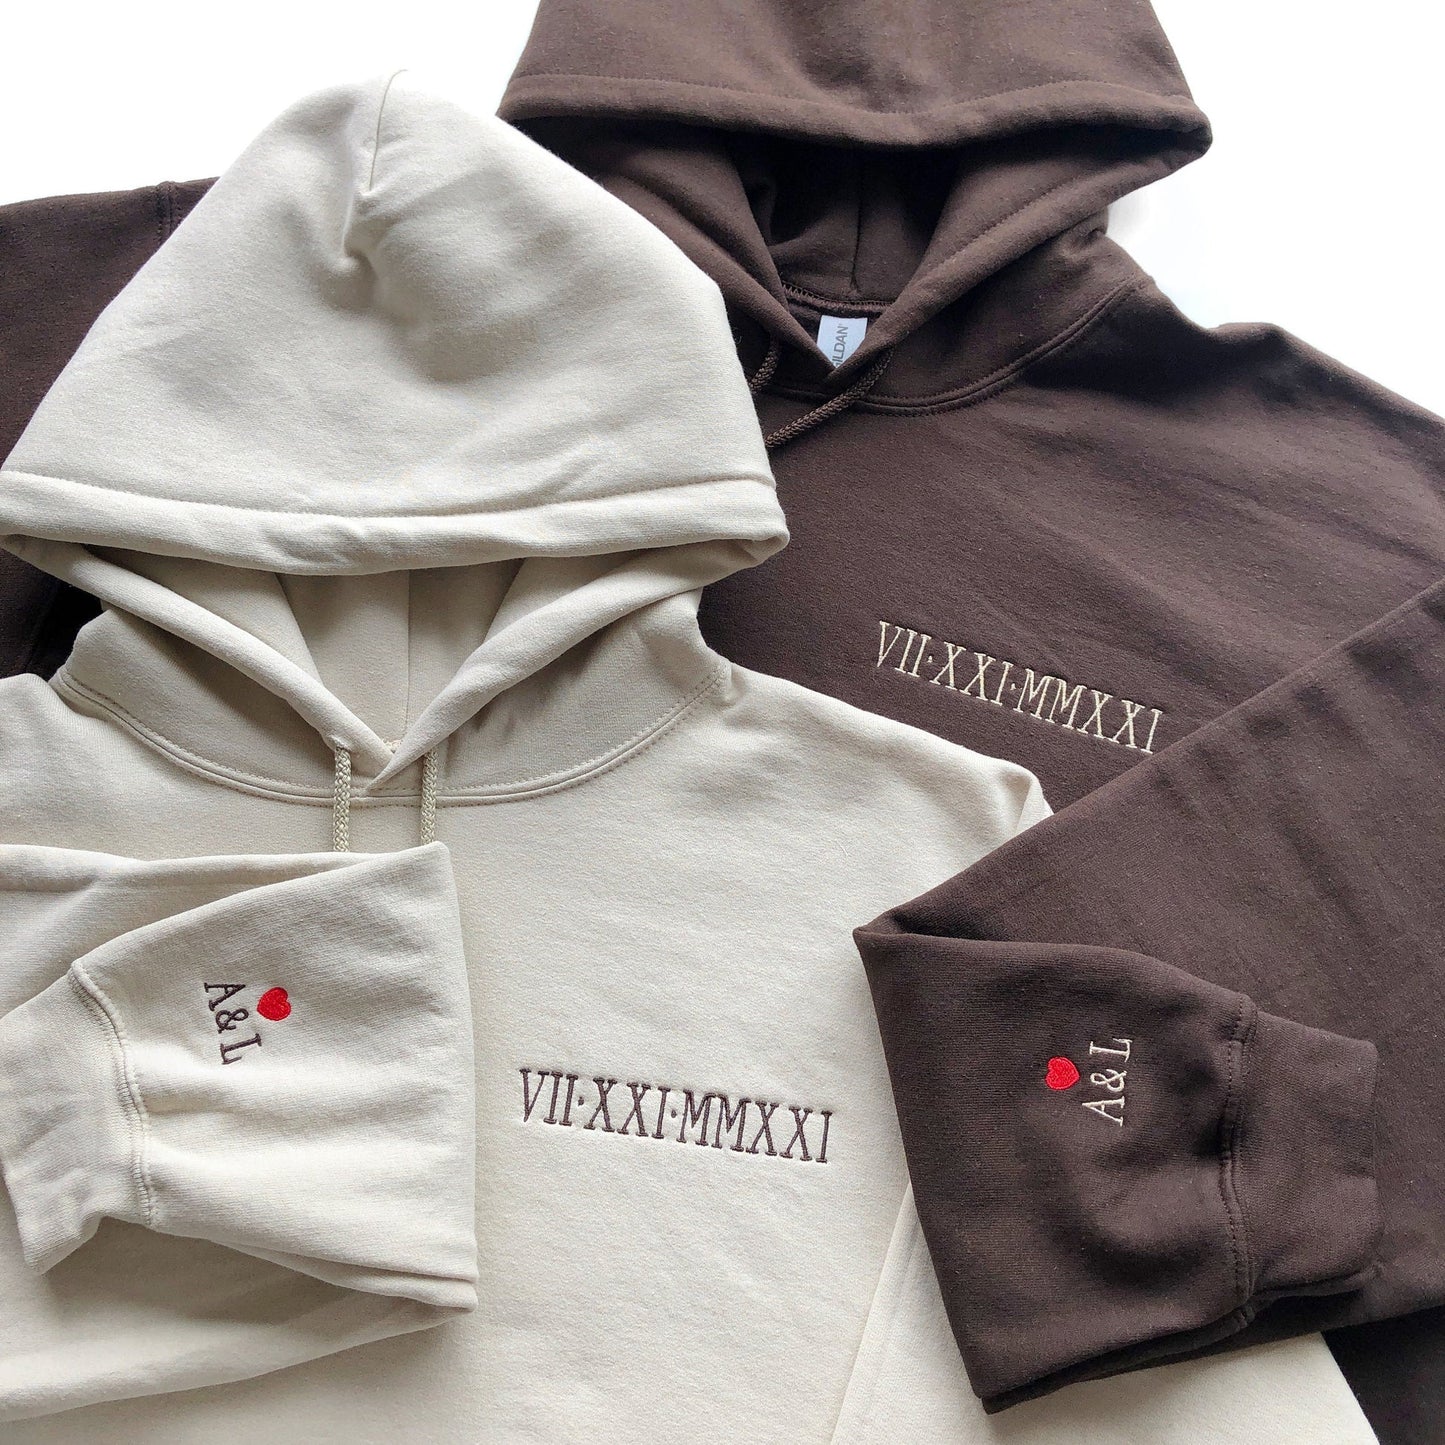 Custom Embroidered Roman Numeral Date Couple's Hoodies